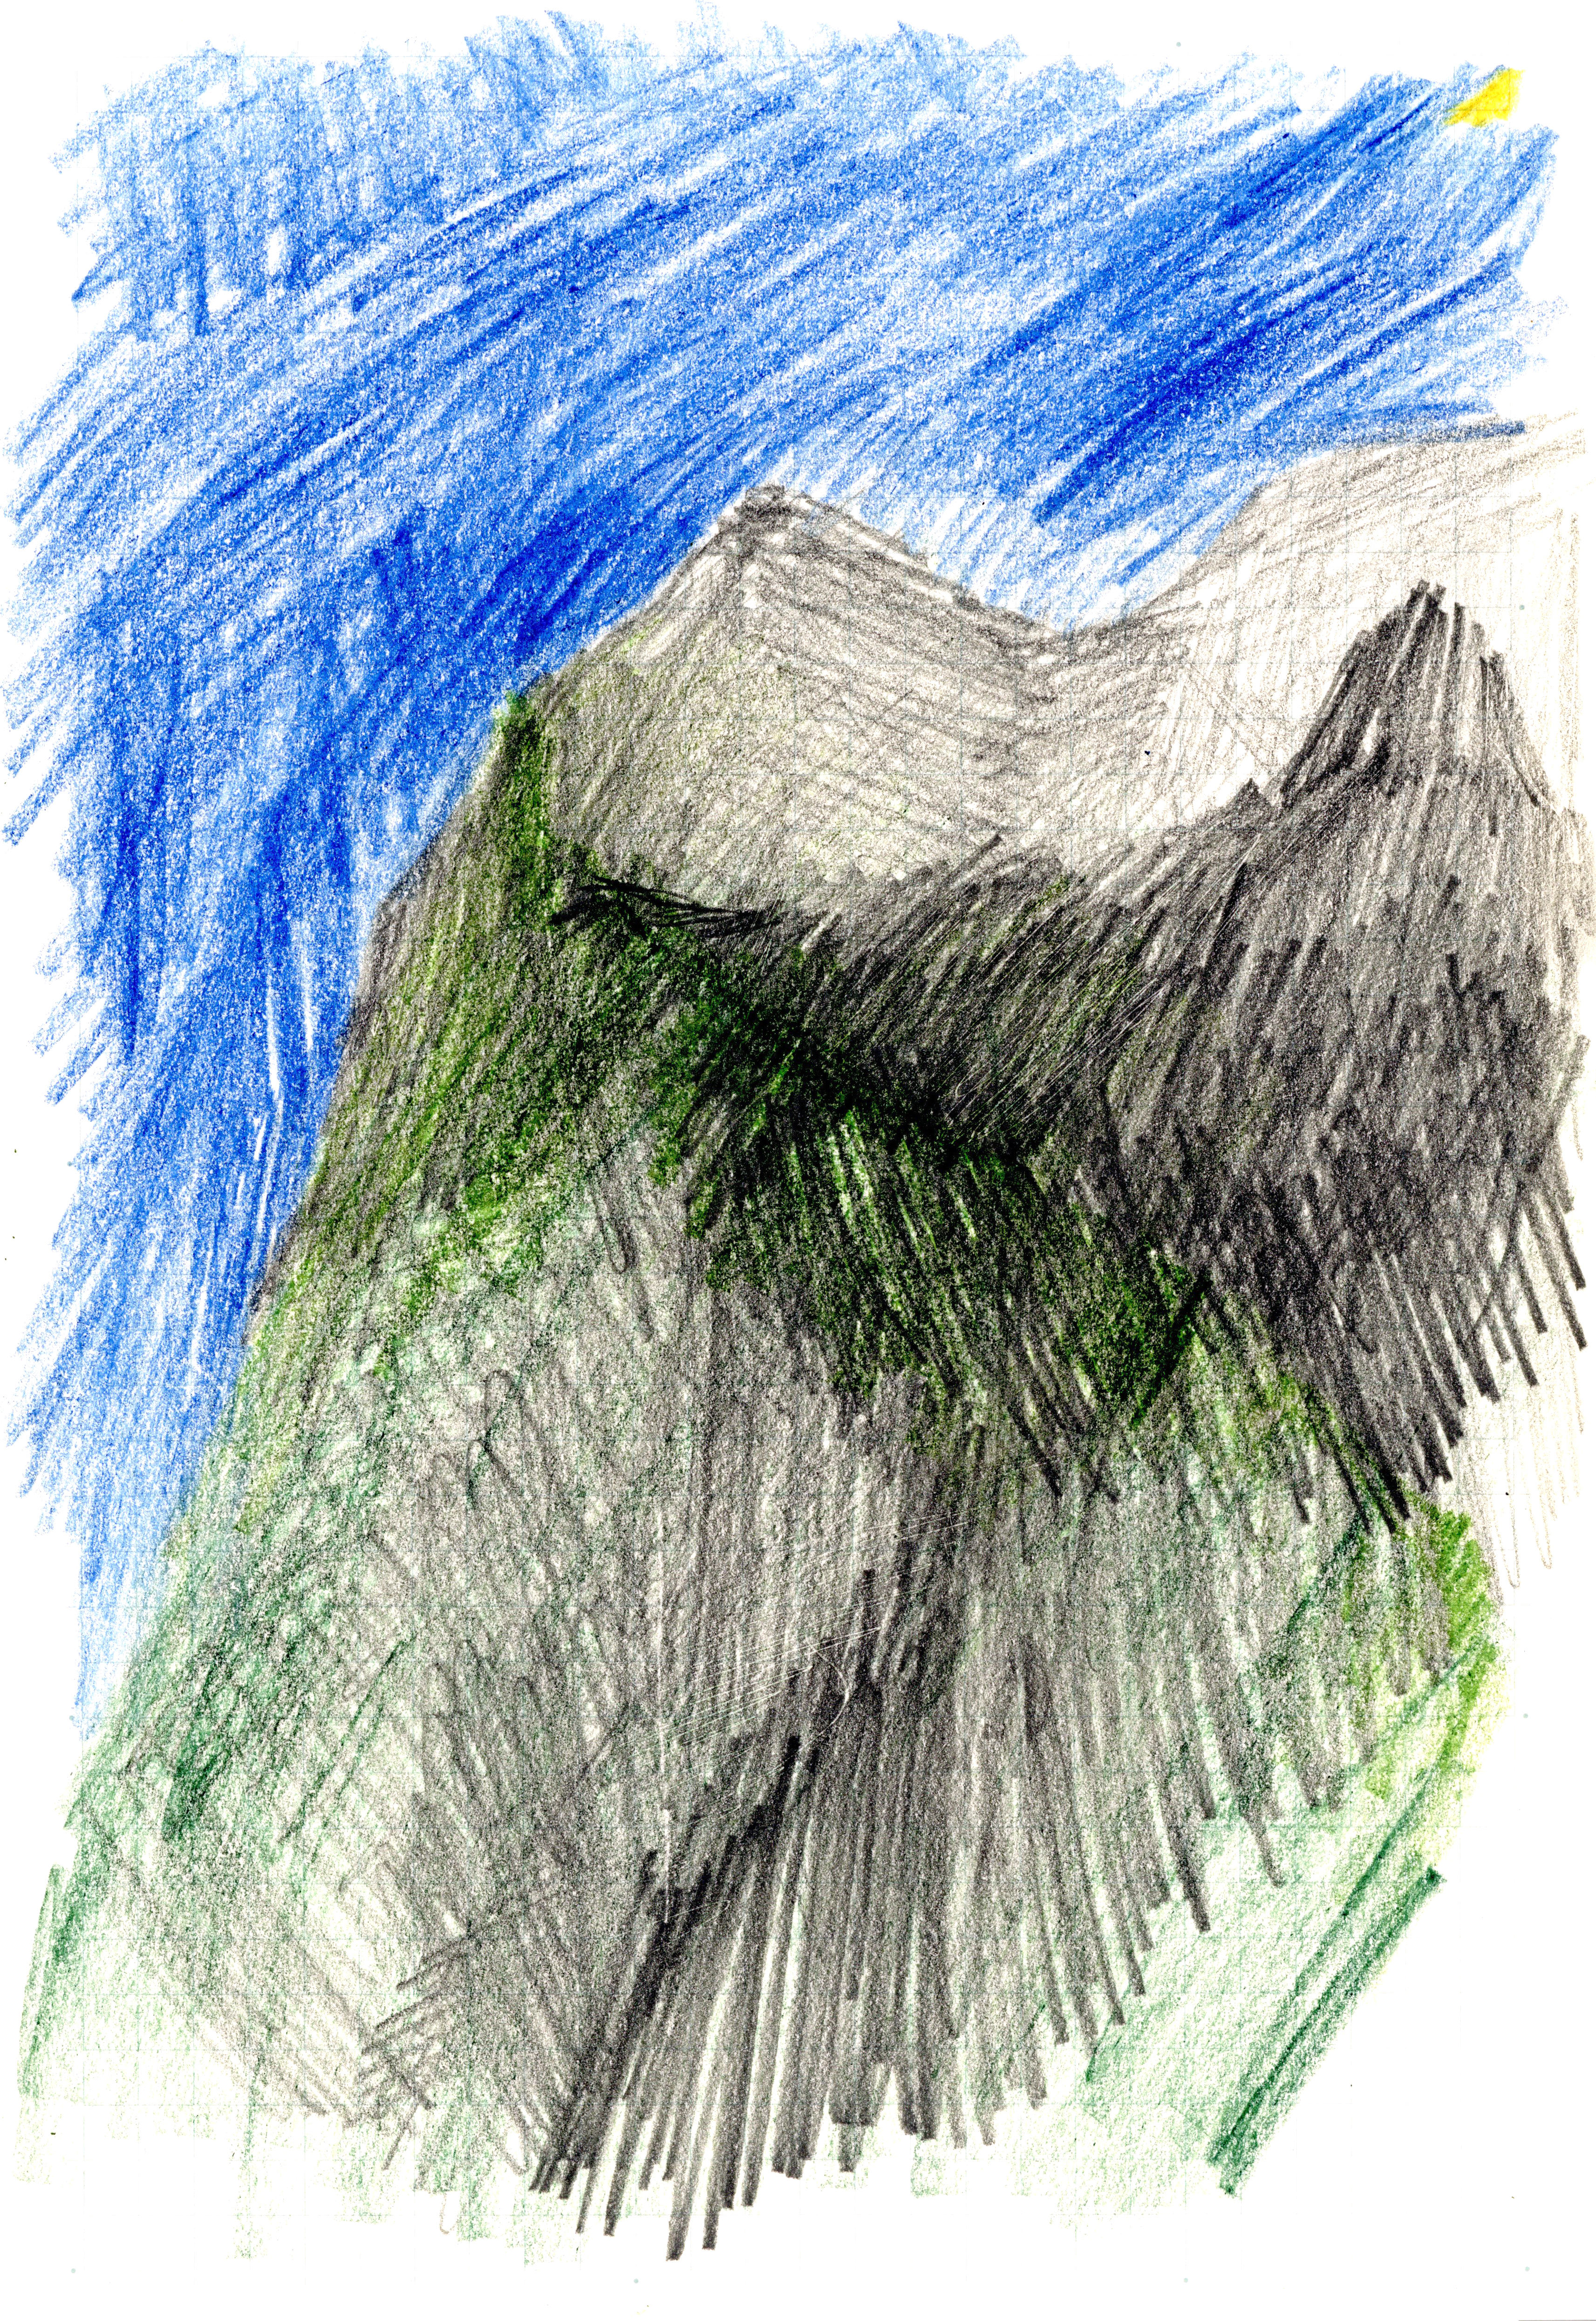 blue sky in the background of a mountain drawn with grey and green